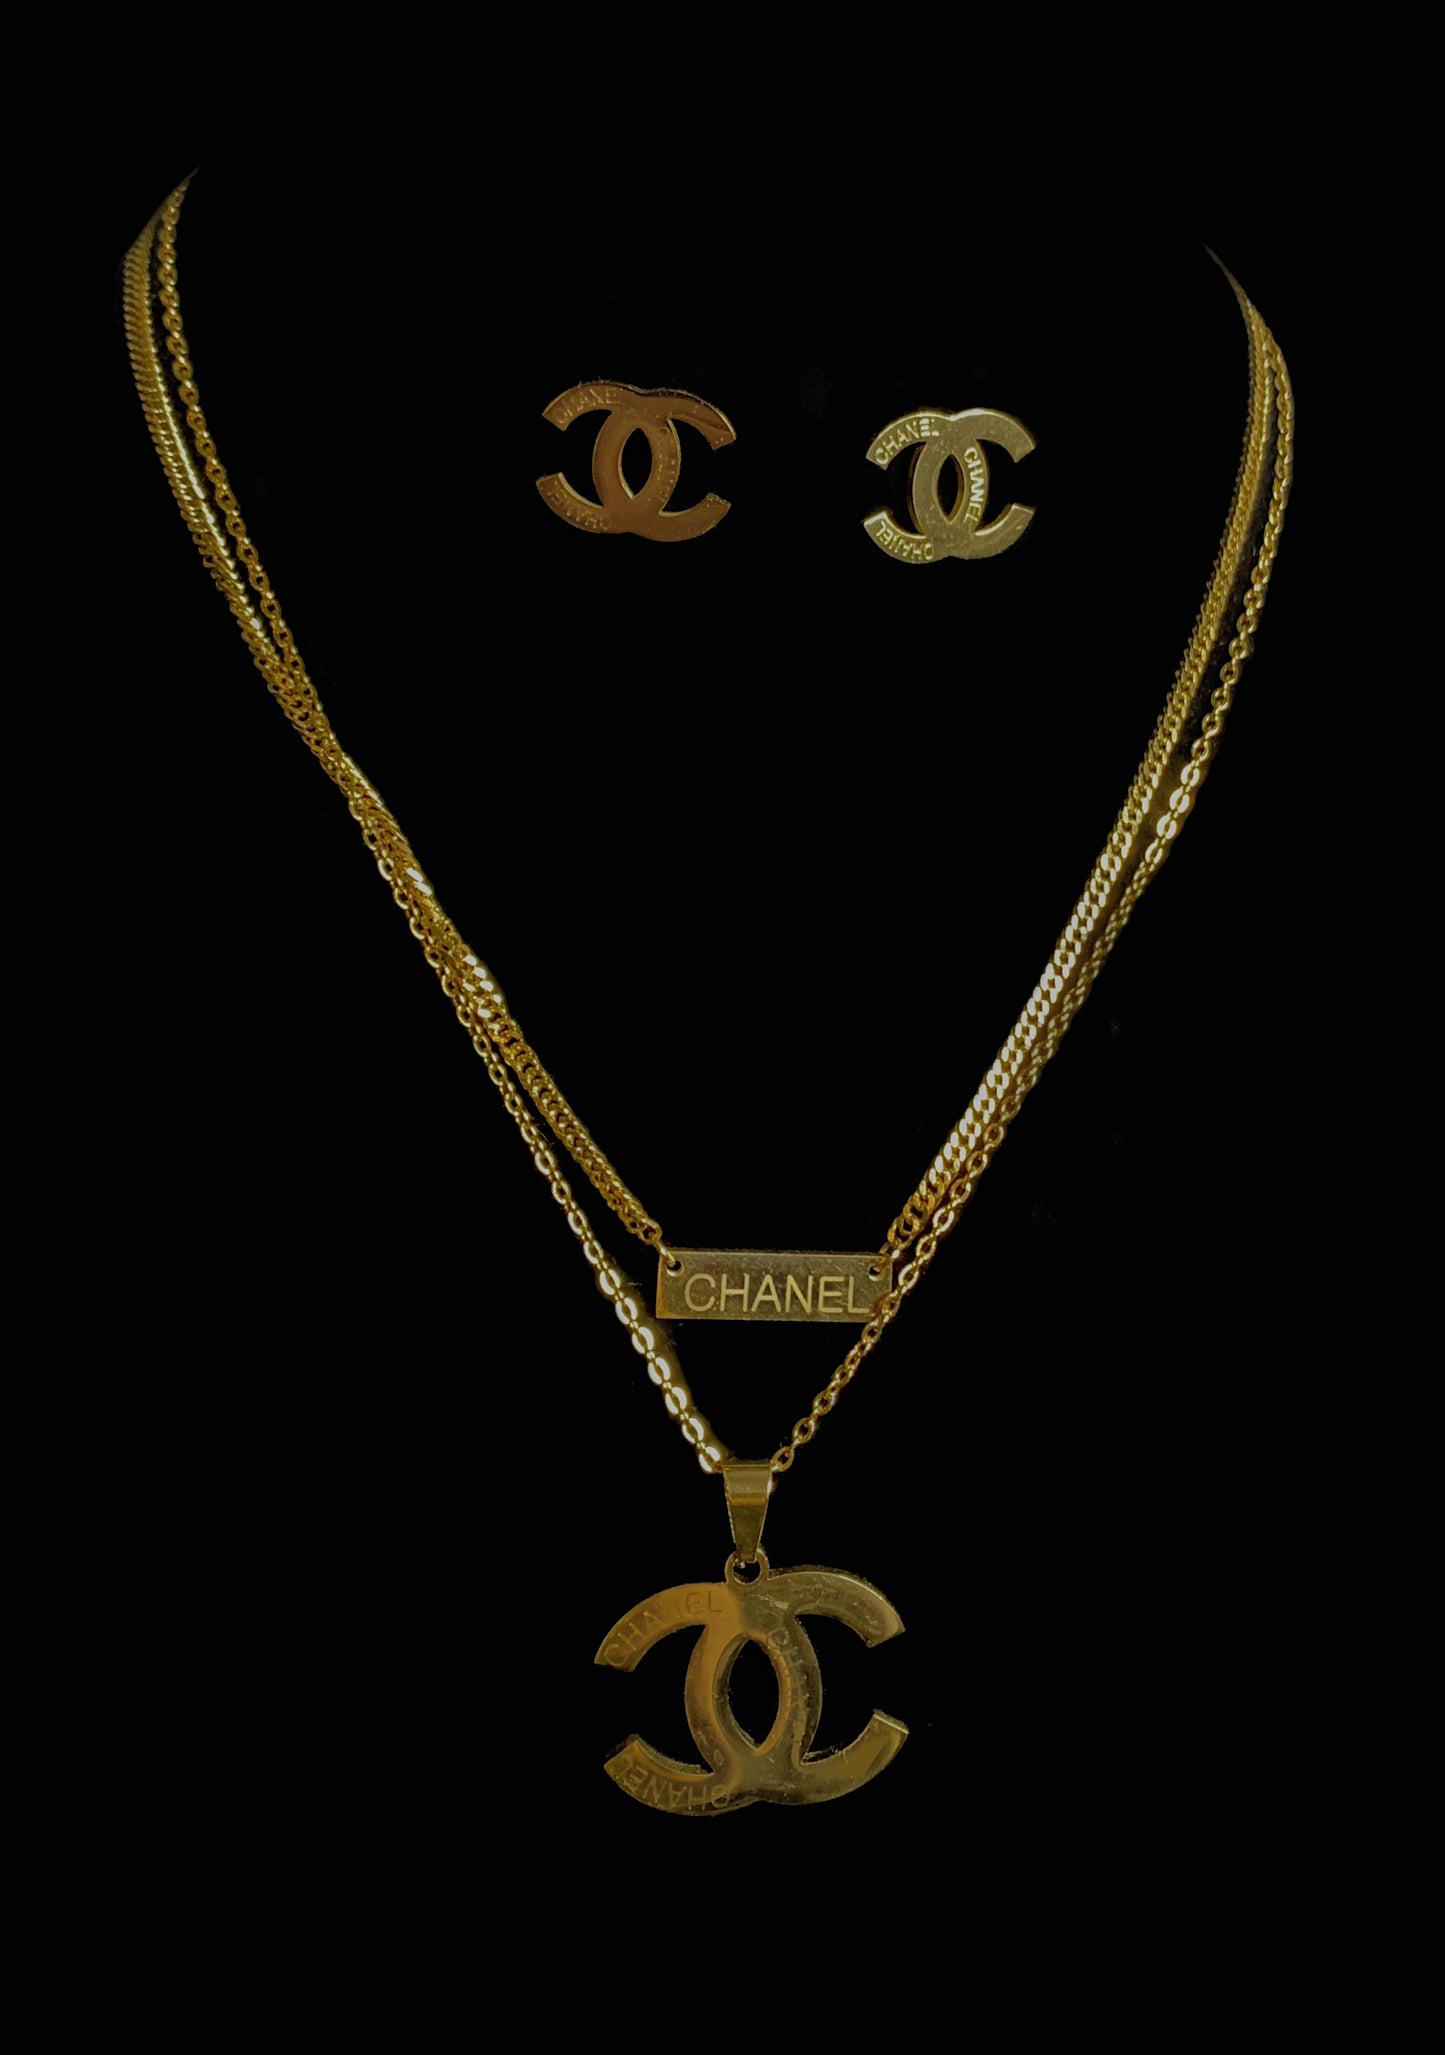 Chanel Inspired Jewelry Set